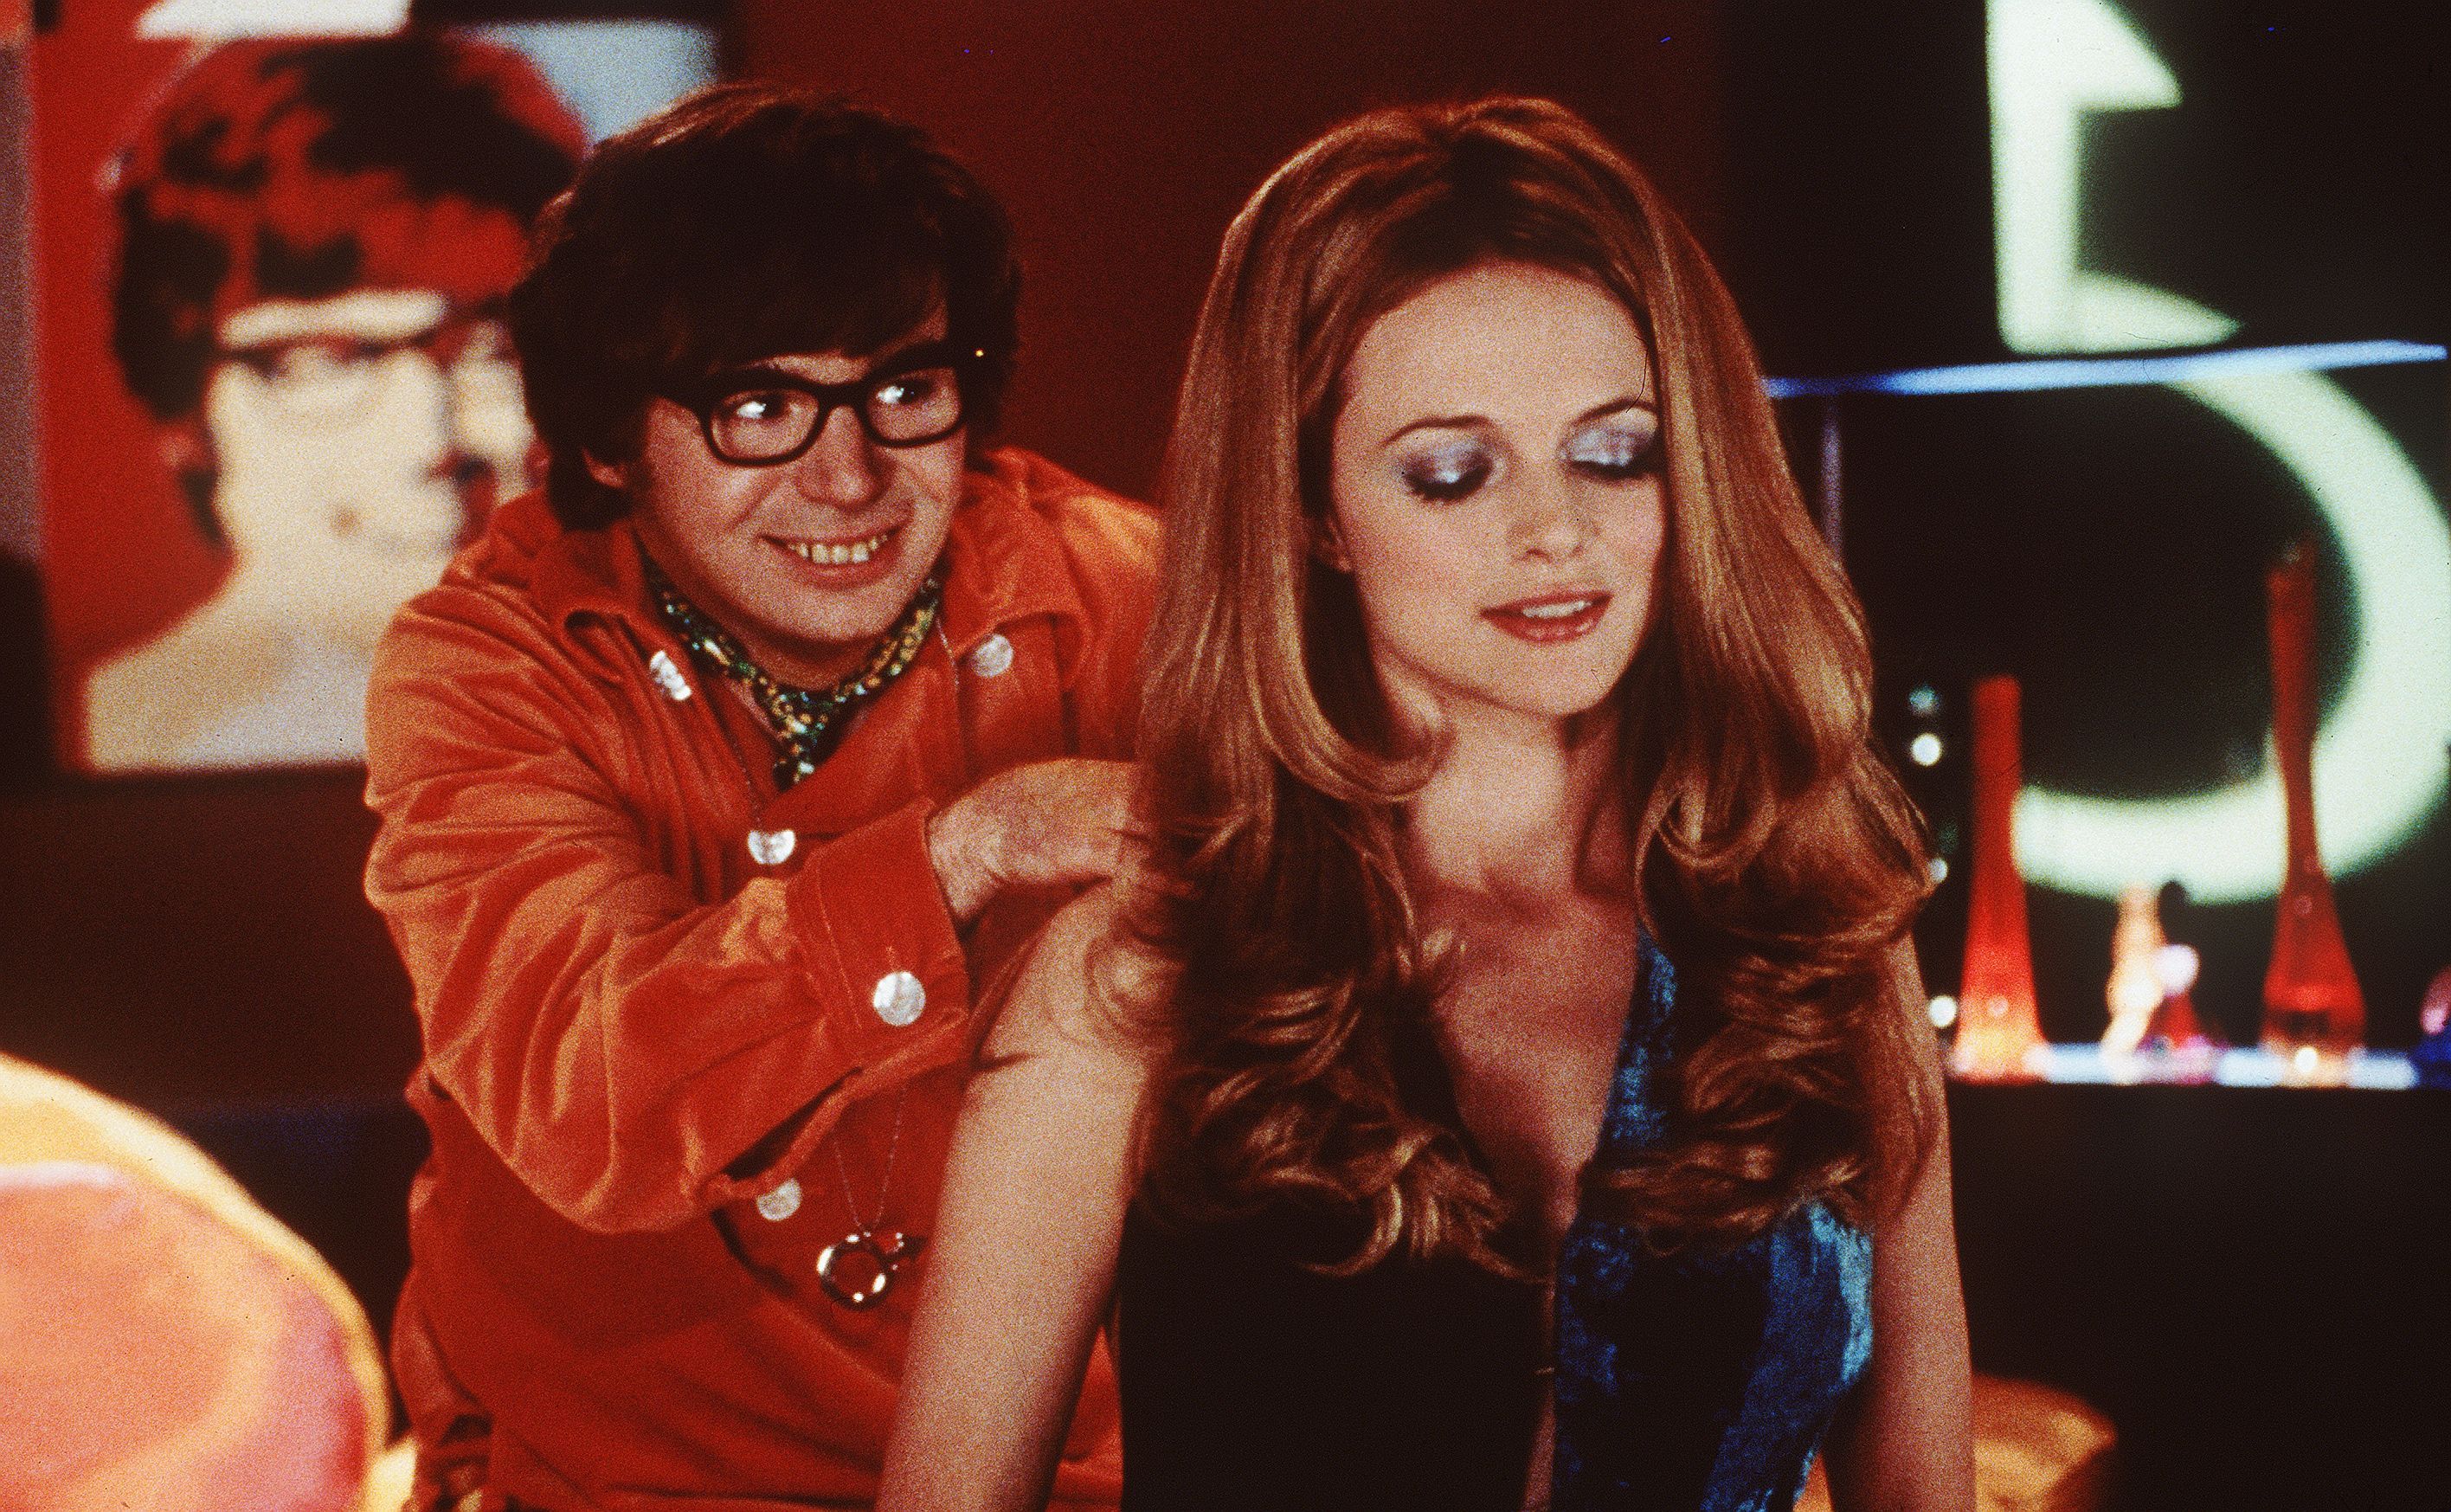 <p>Coming in at No. 18 is the "Austin Powers" sequel "Austin Powers: The Spy Who Shagged Me," starring Mike Myers and Heather Graham (pictured). The 1999 movie was fun, entertaining and almost as funny as the original. Will Ferrell has a small role in the film as henchman Mustafa, but his ability to be "very badly" hurt over and over again was truly hilarious and made a lasting impression!</p>